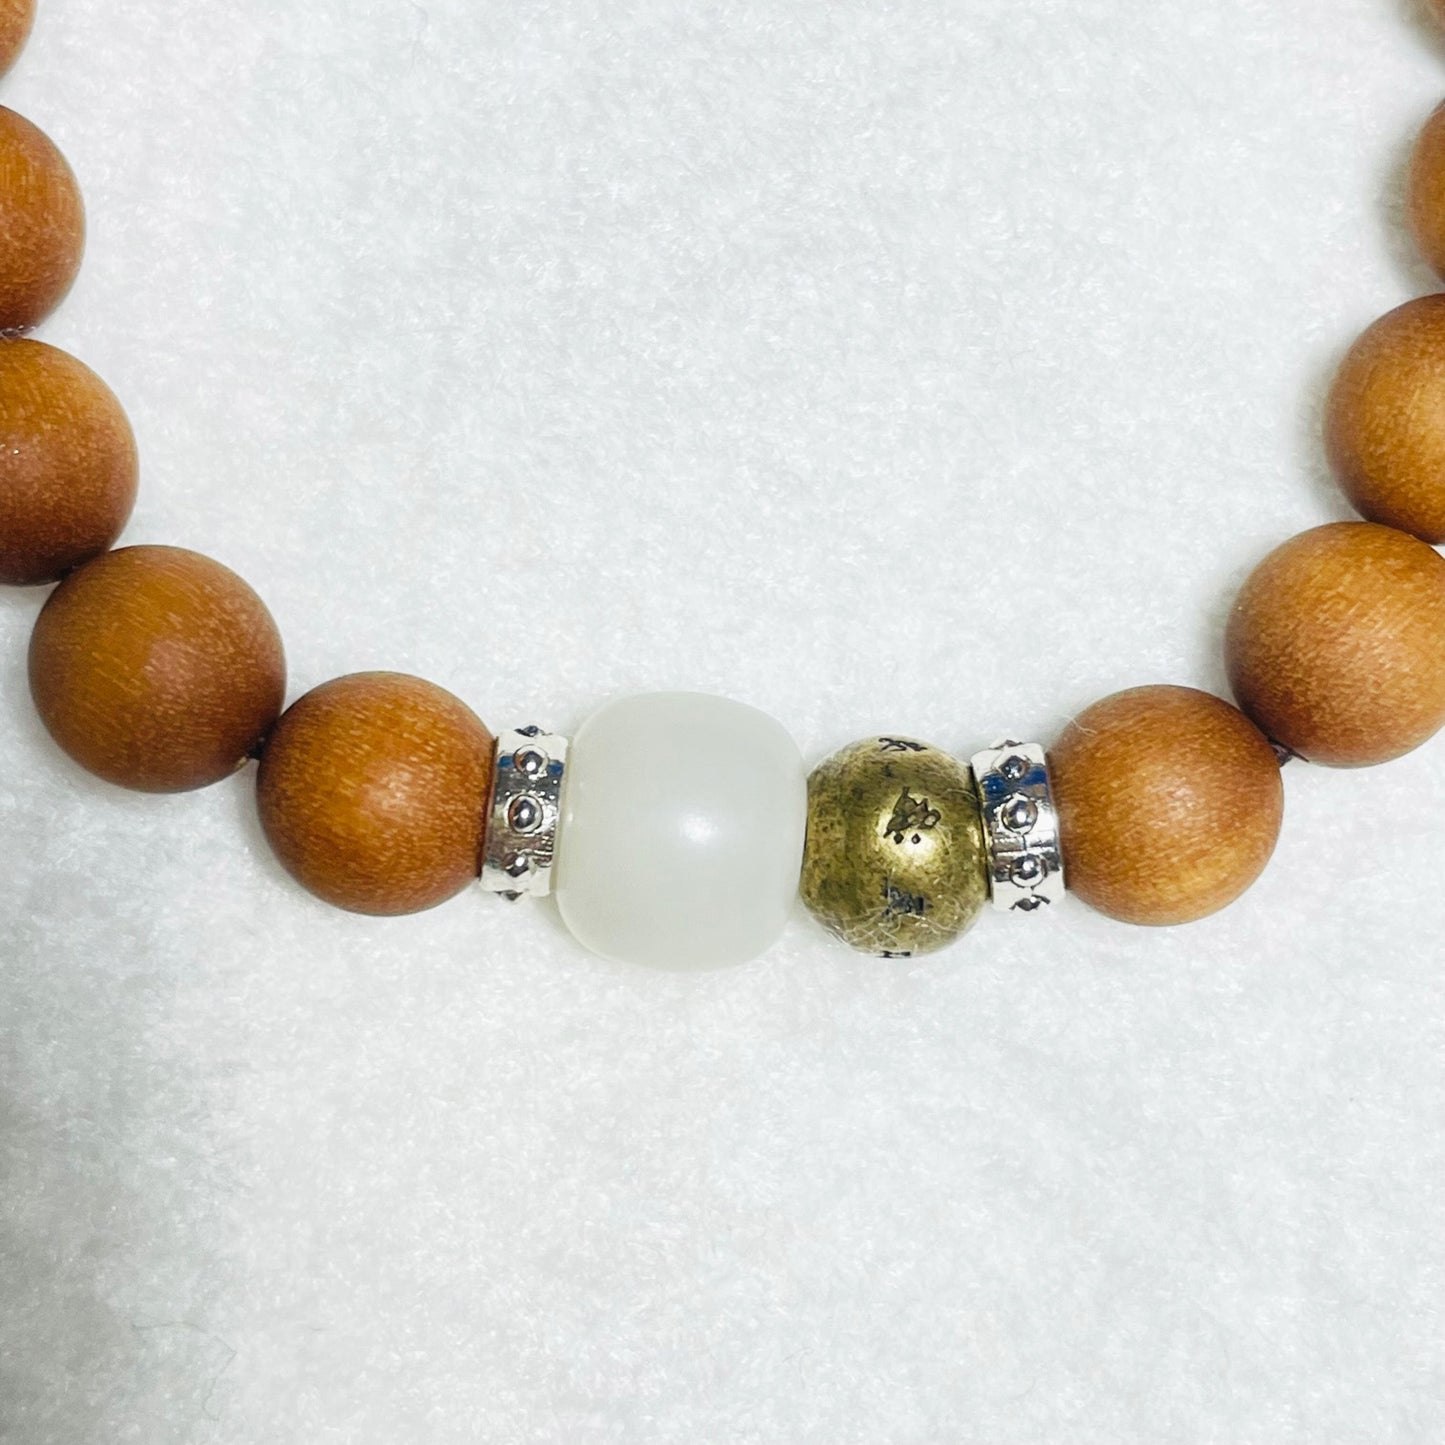 Natural Sandalwood with Buddha Root and Six-Word Mantra Bracelet 8mm